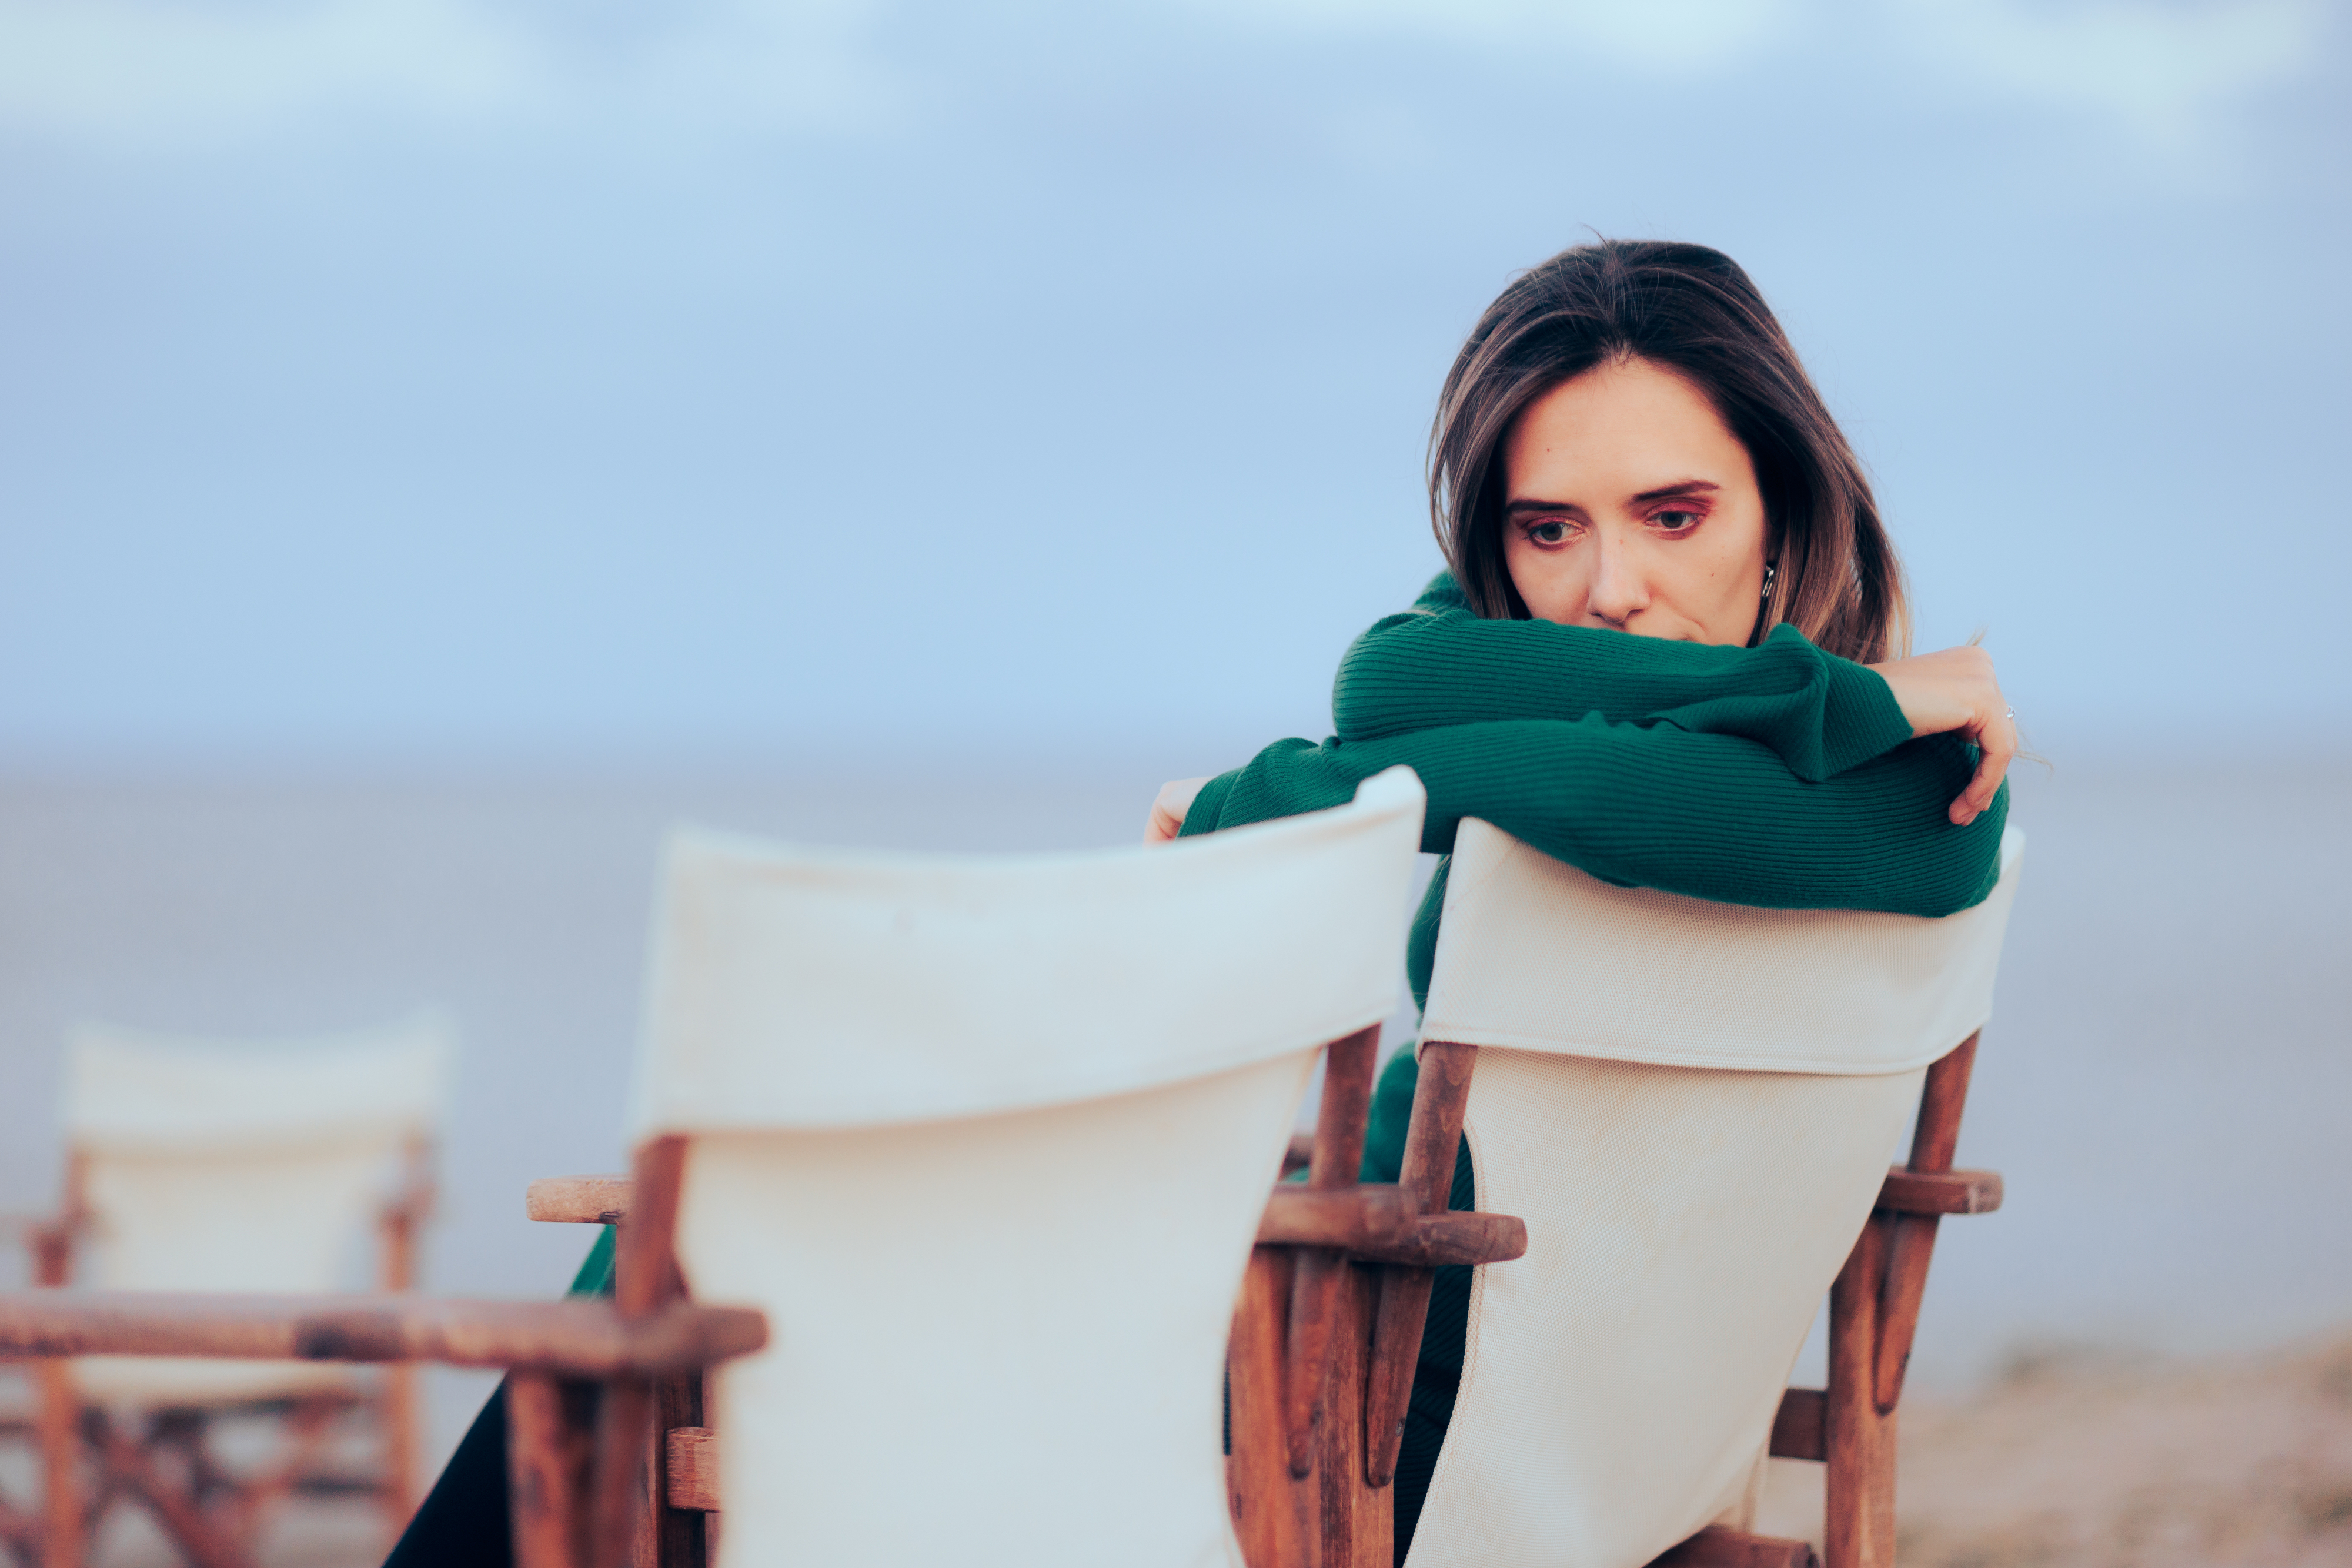 Woman sitting in a deck chair on a beach, wrapped in a sweater, resting her chin on her arms